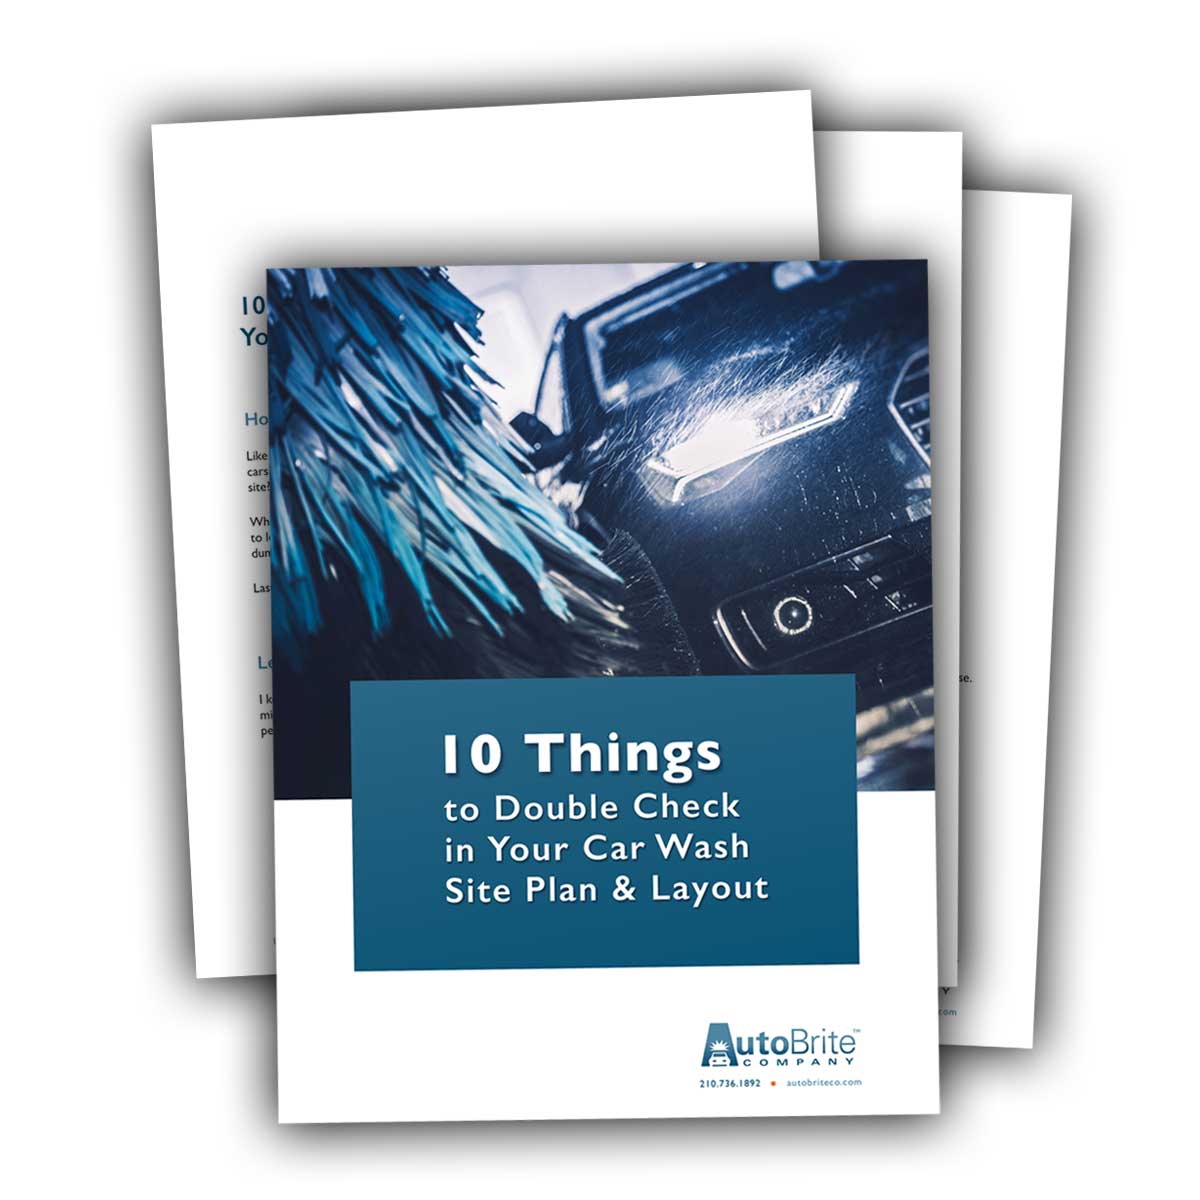 AutoBrite 10 Things Paper preview